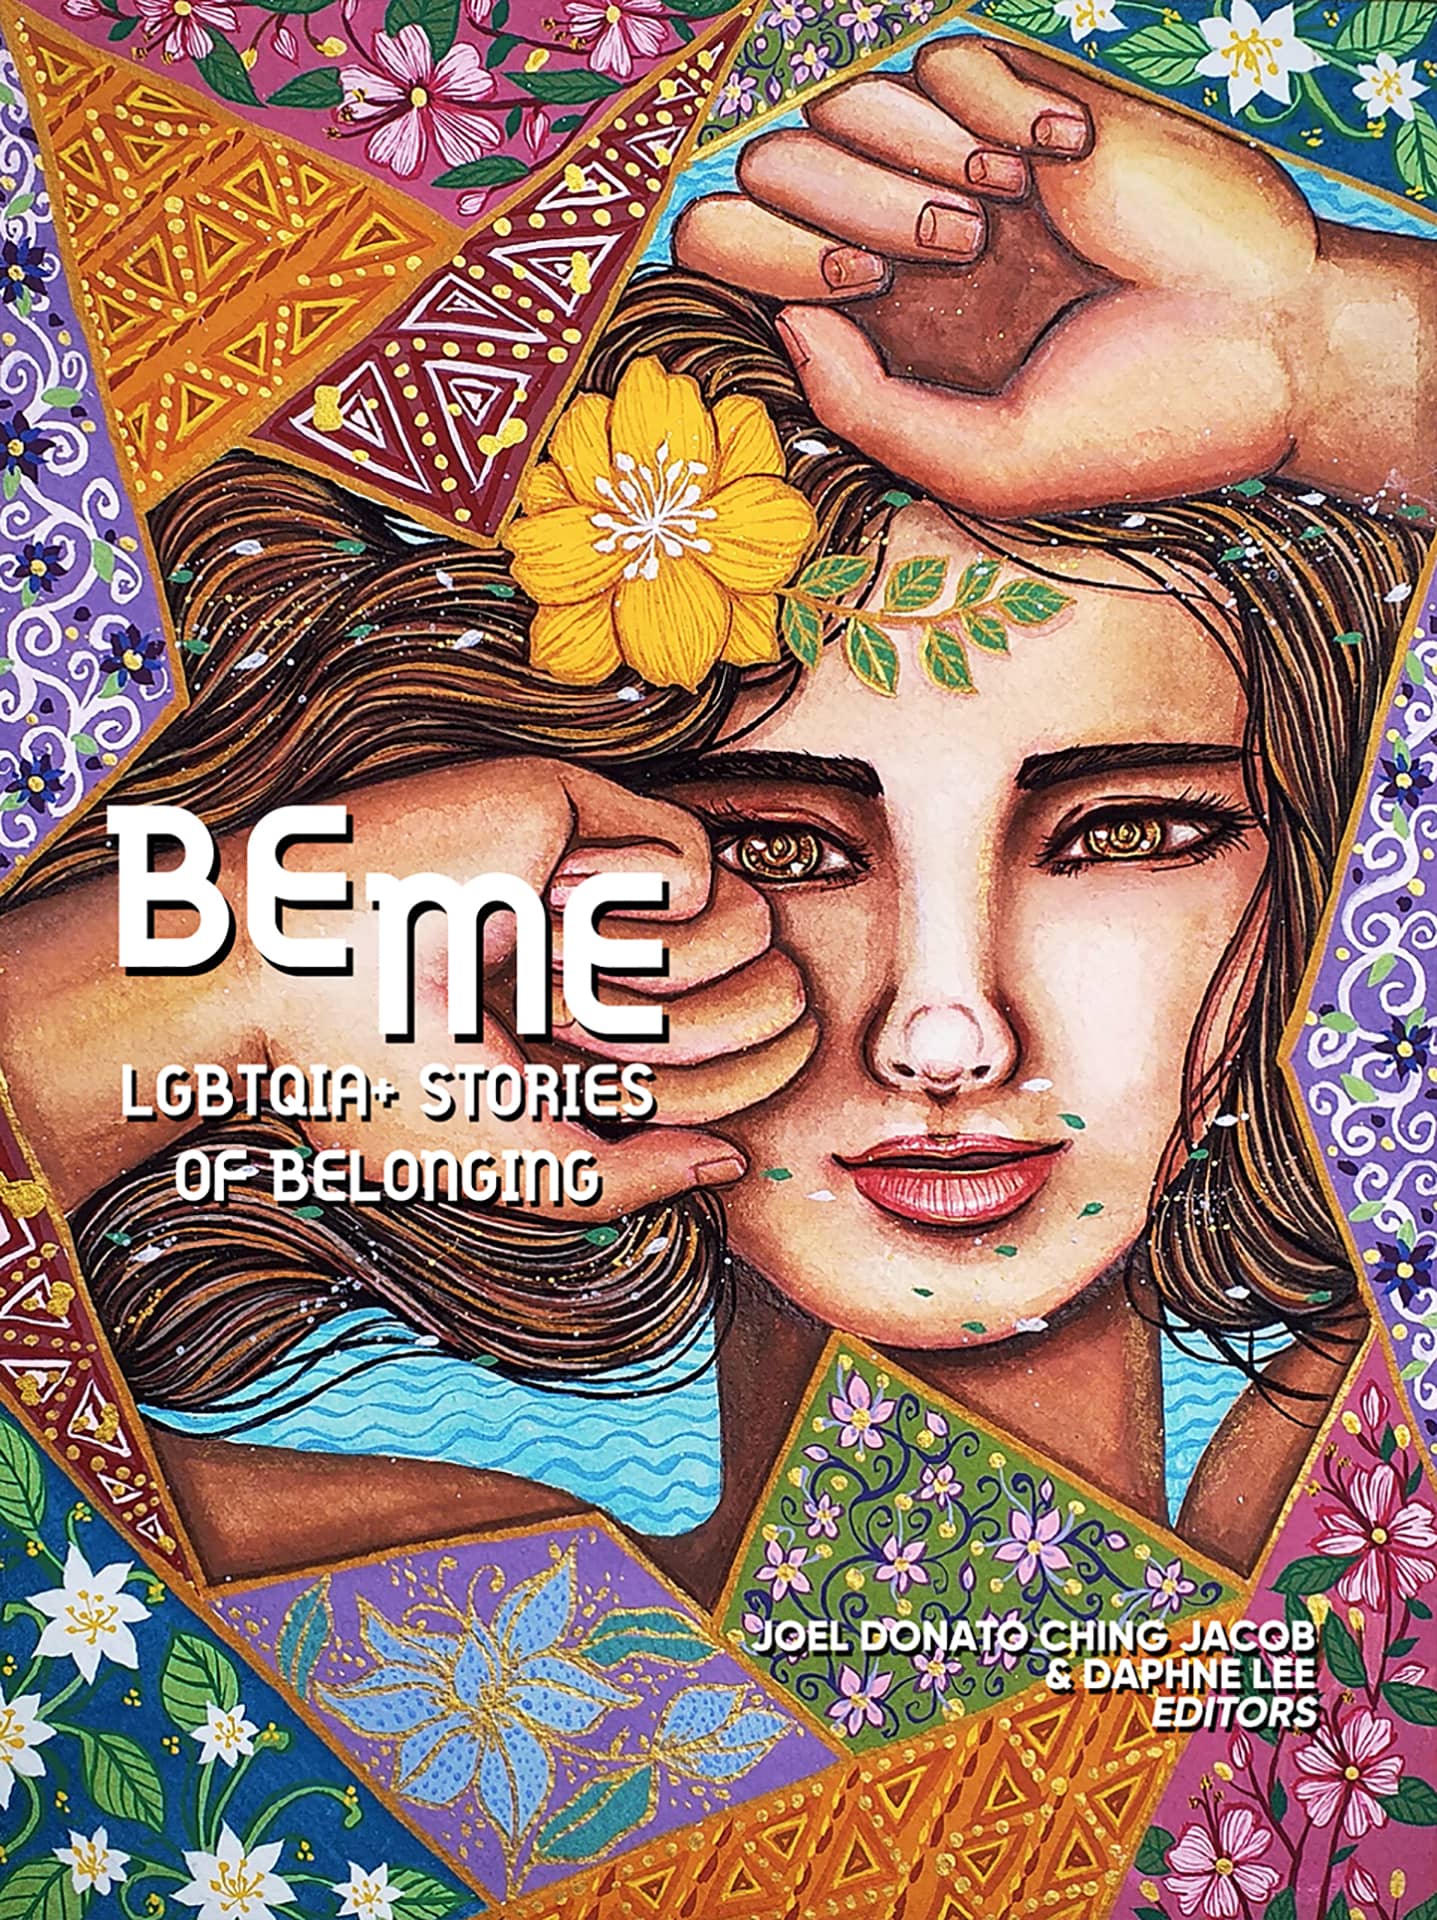 Be me poster